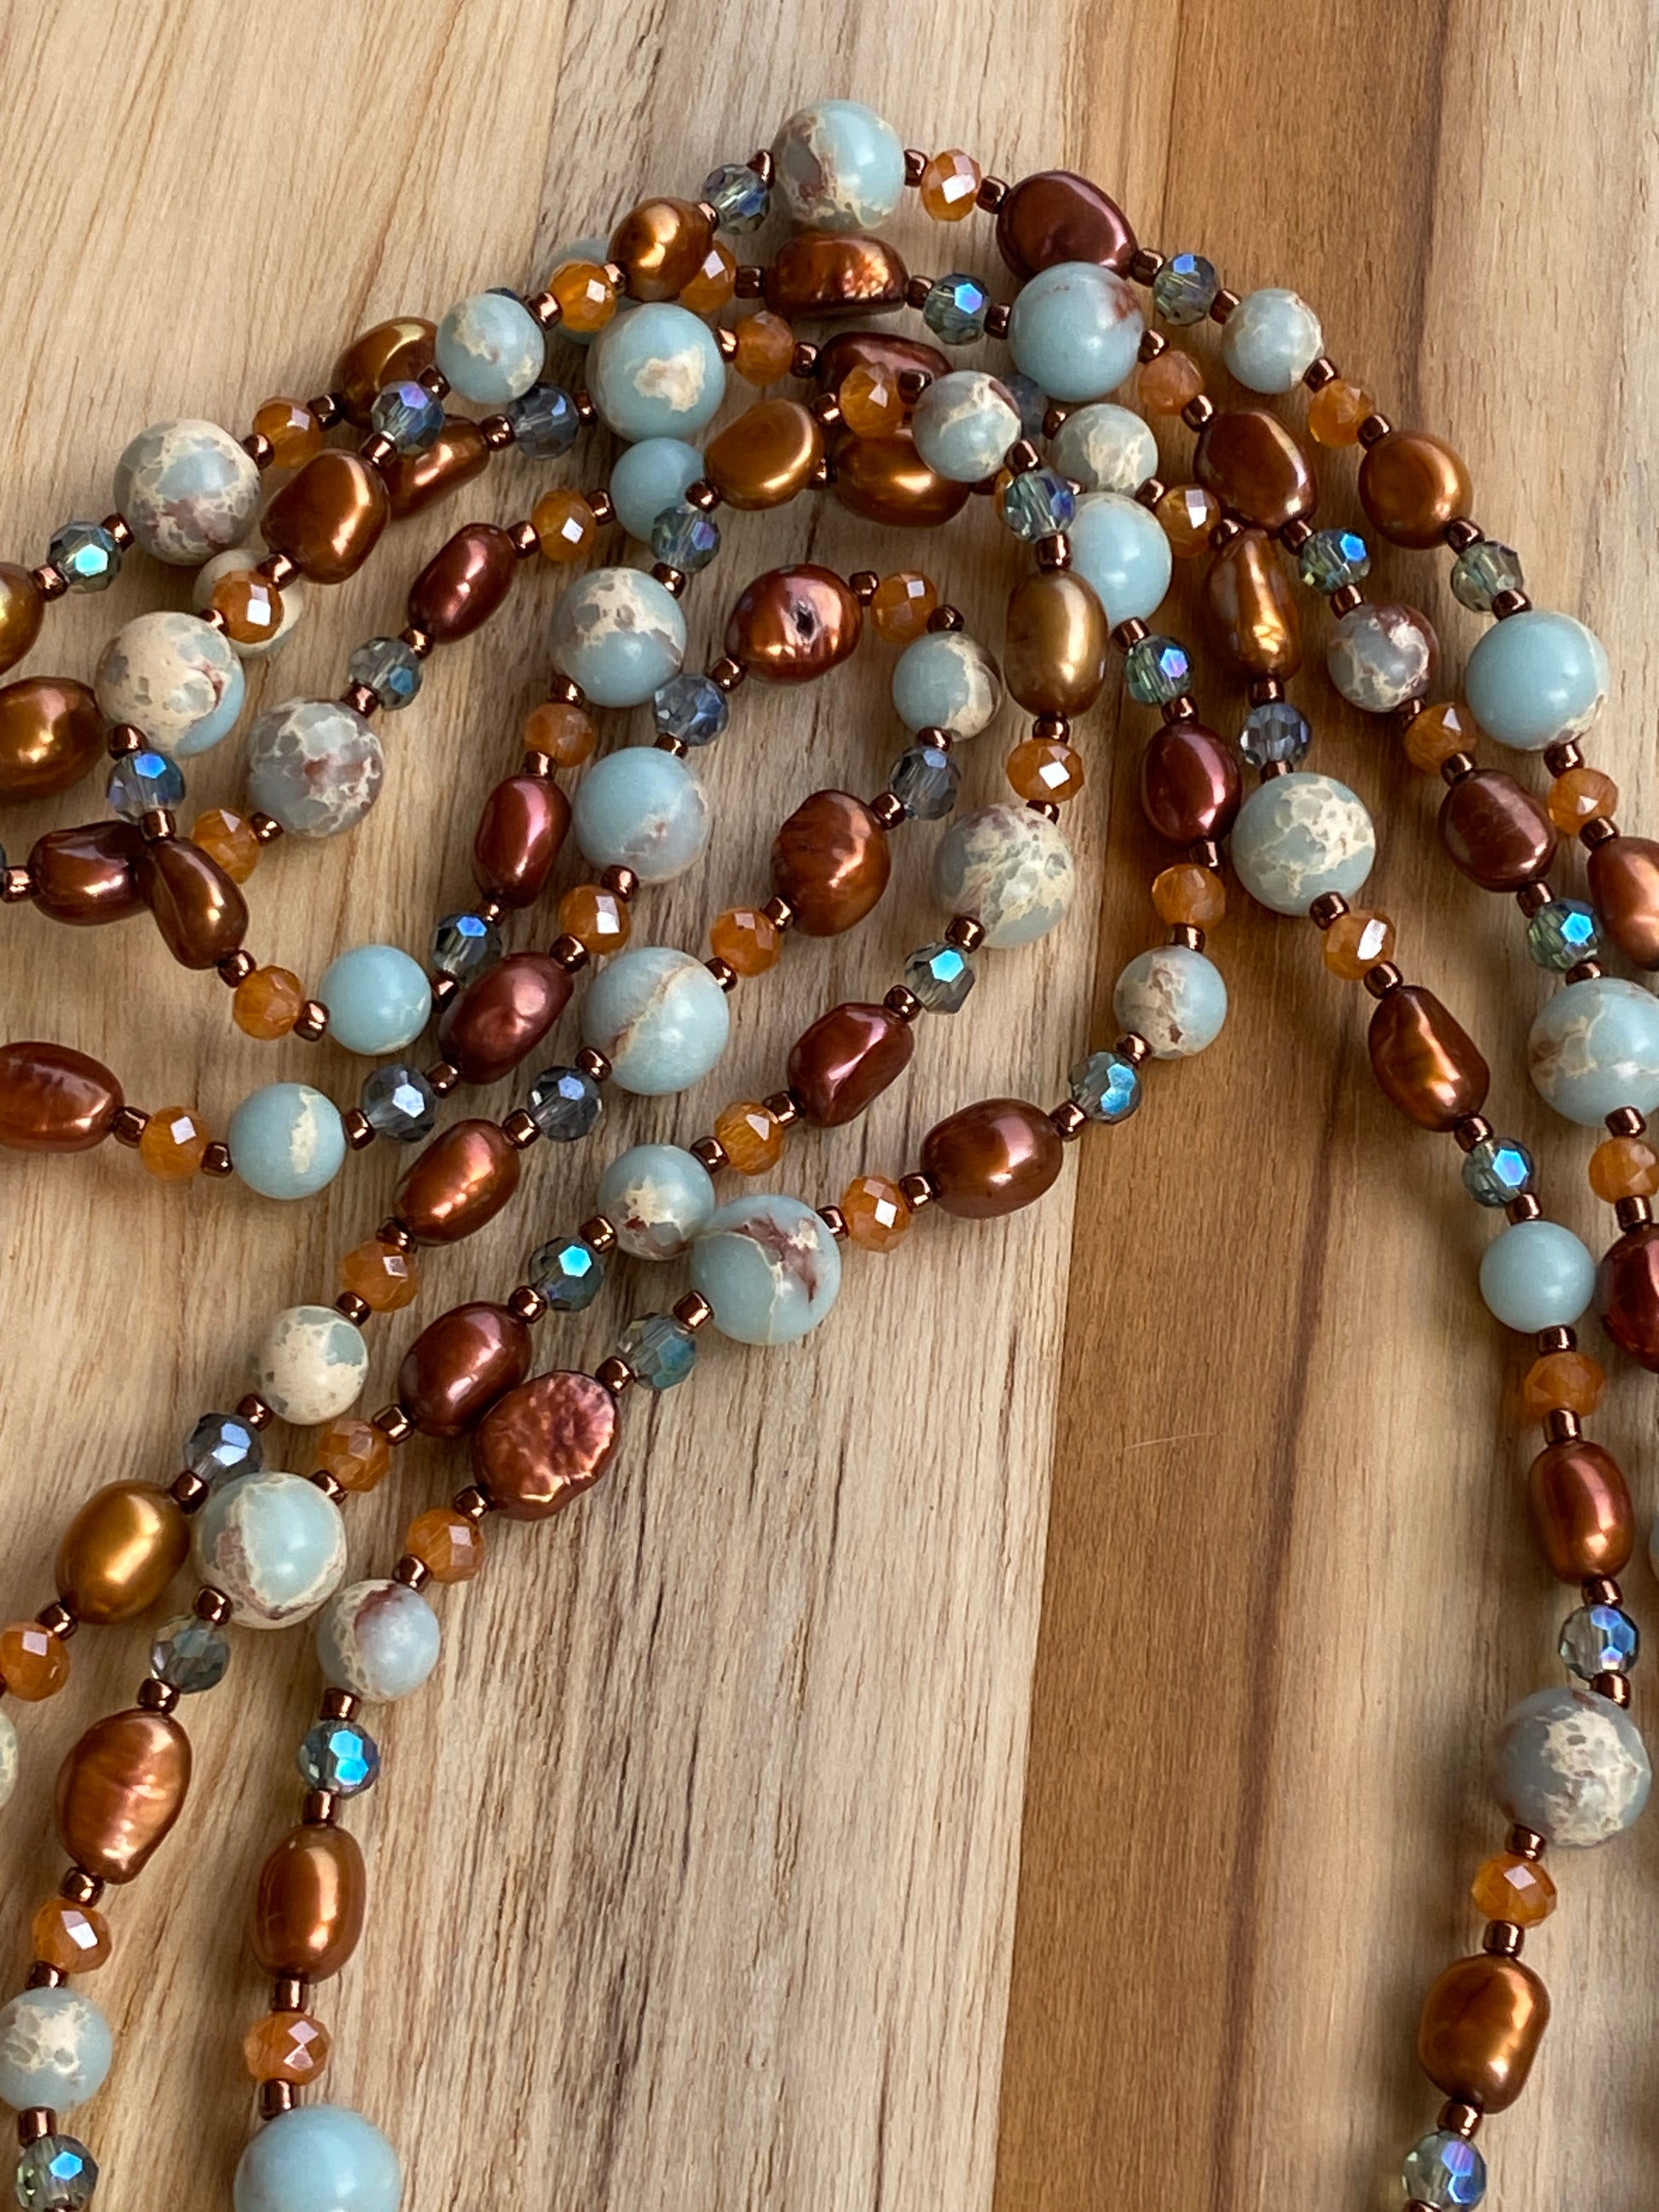 60" Extra Long Wraparound Style Necklace with Shoushan Stone Pearls and Crystal Beads - My Urban Gems